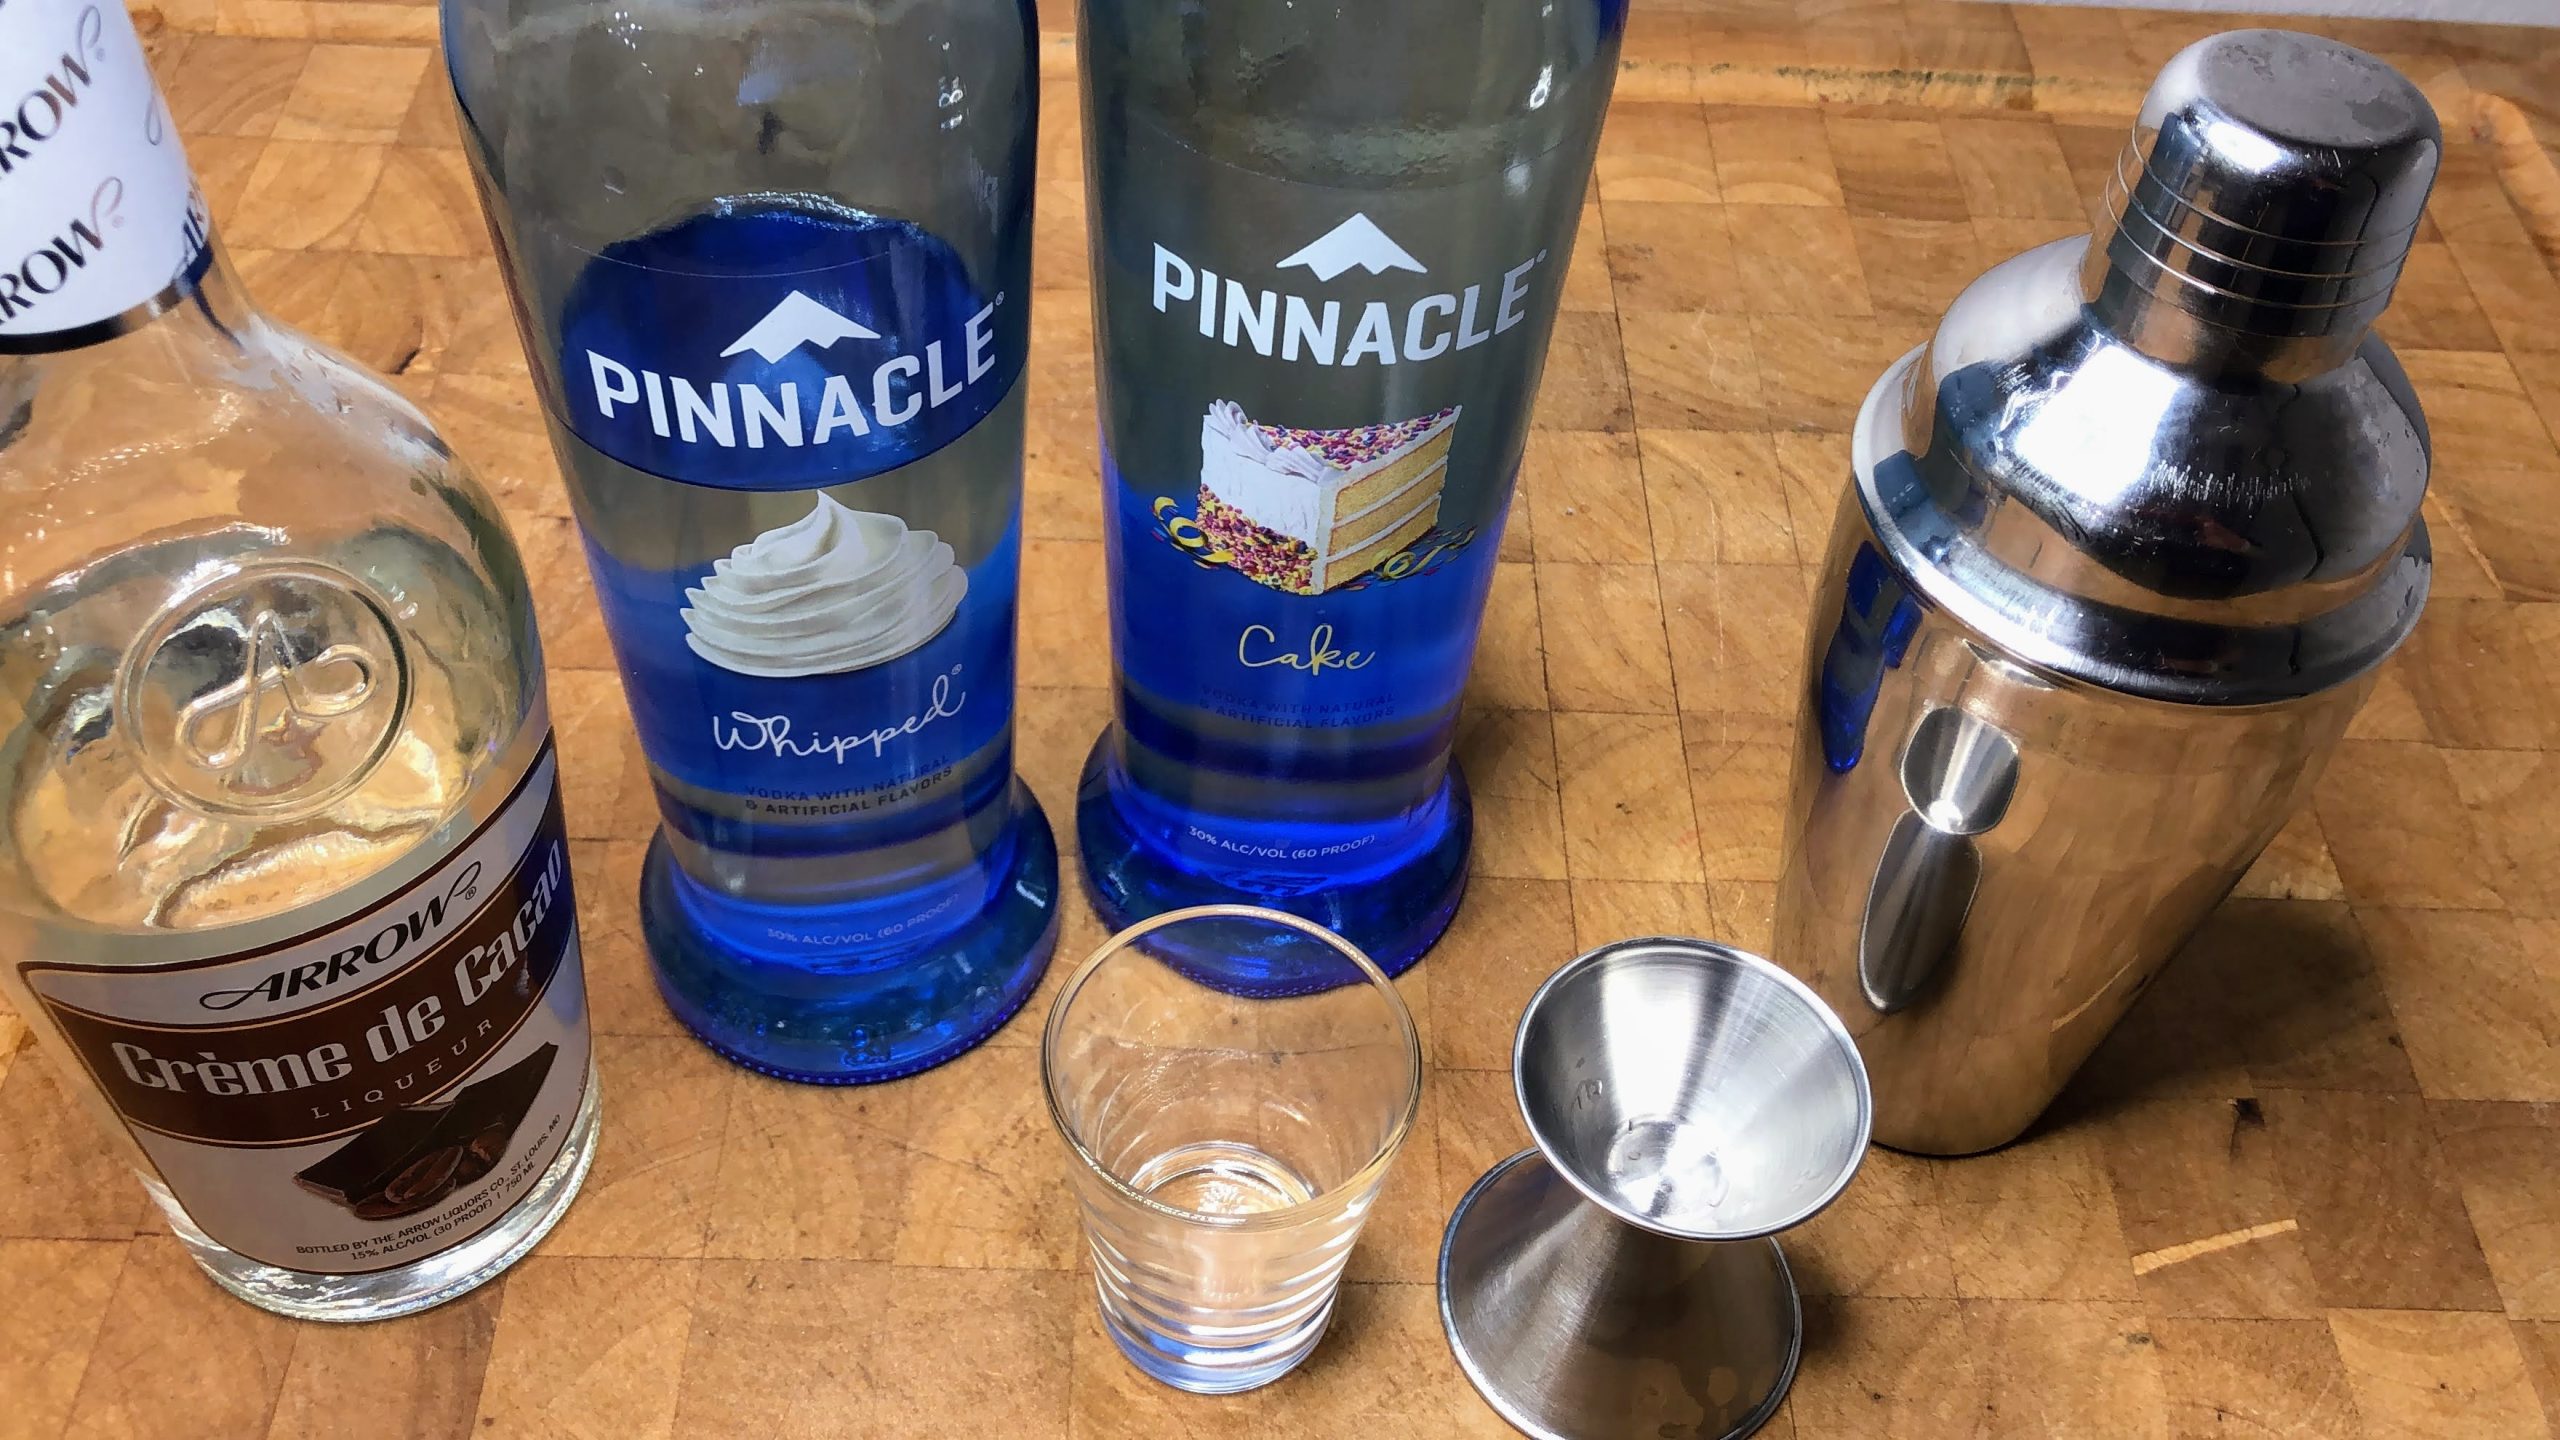 Bottles of creme de cacao, whipped cream vodka and cake vodka next to a shot glass, jigger and cocktail shaker.